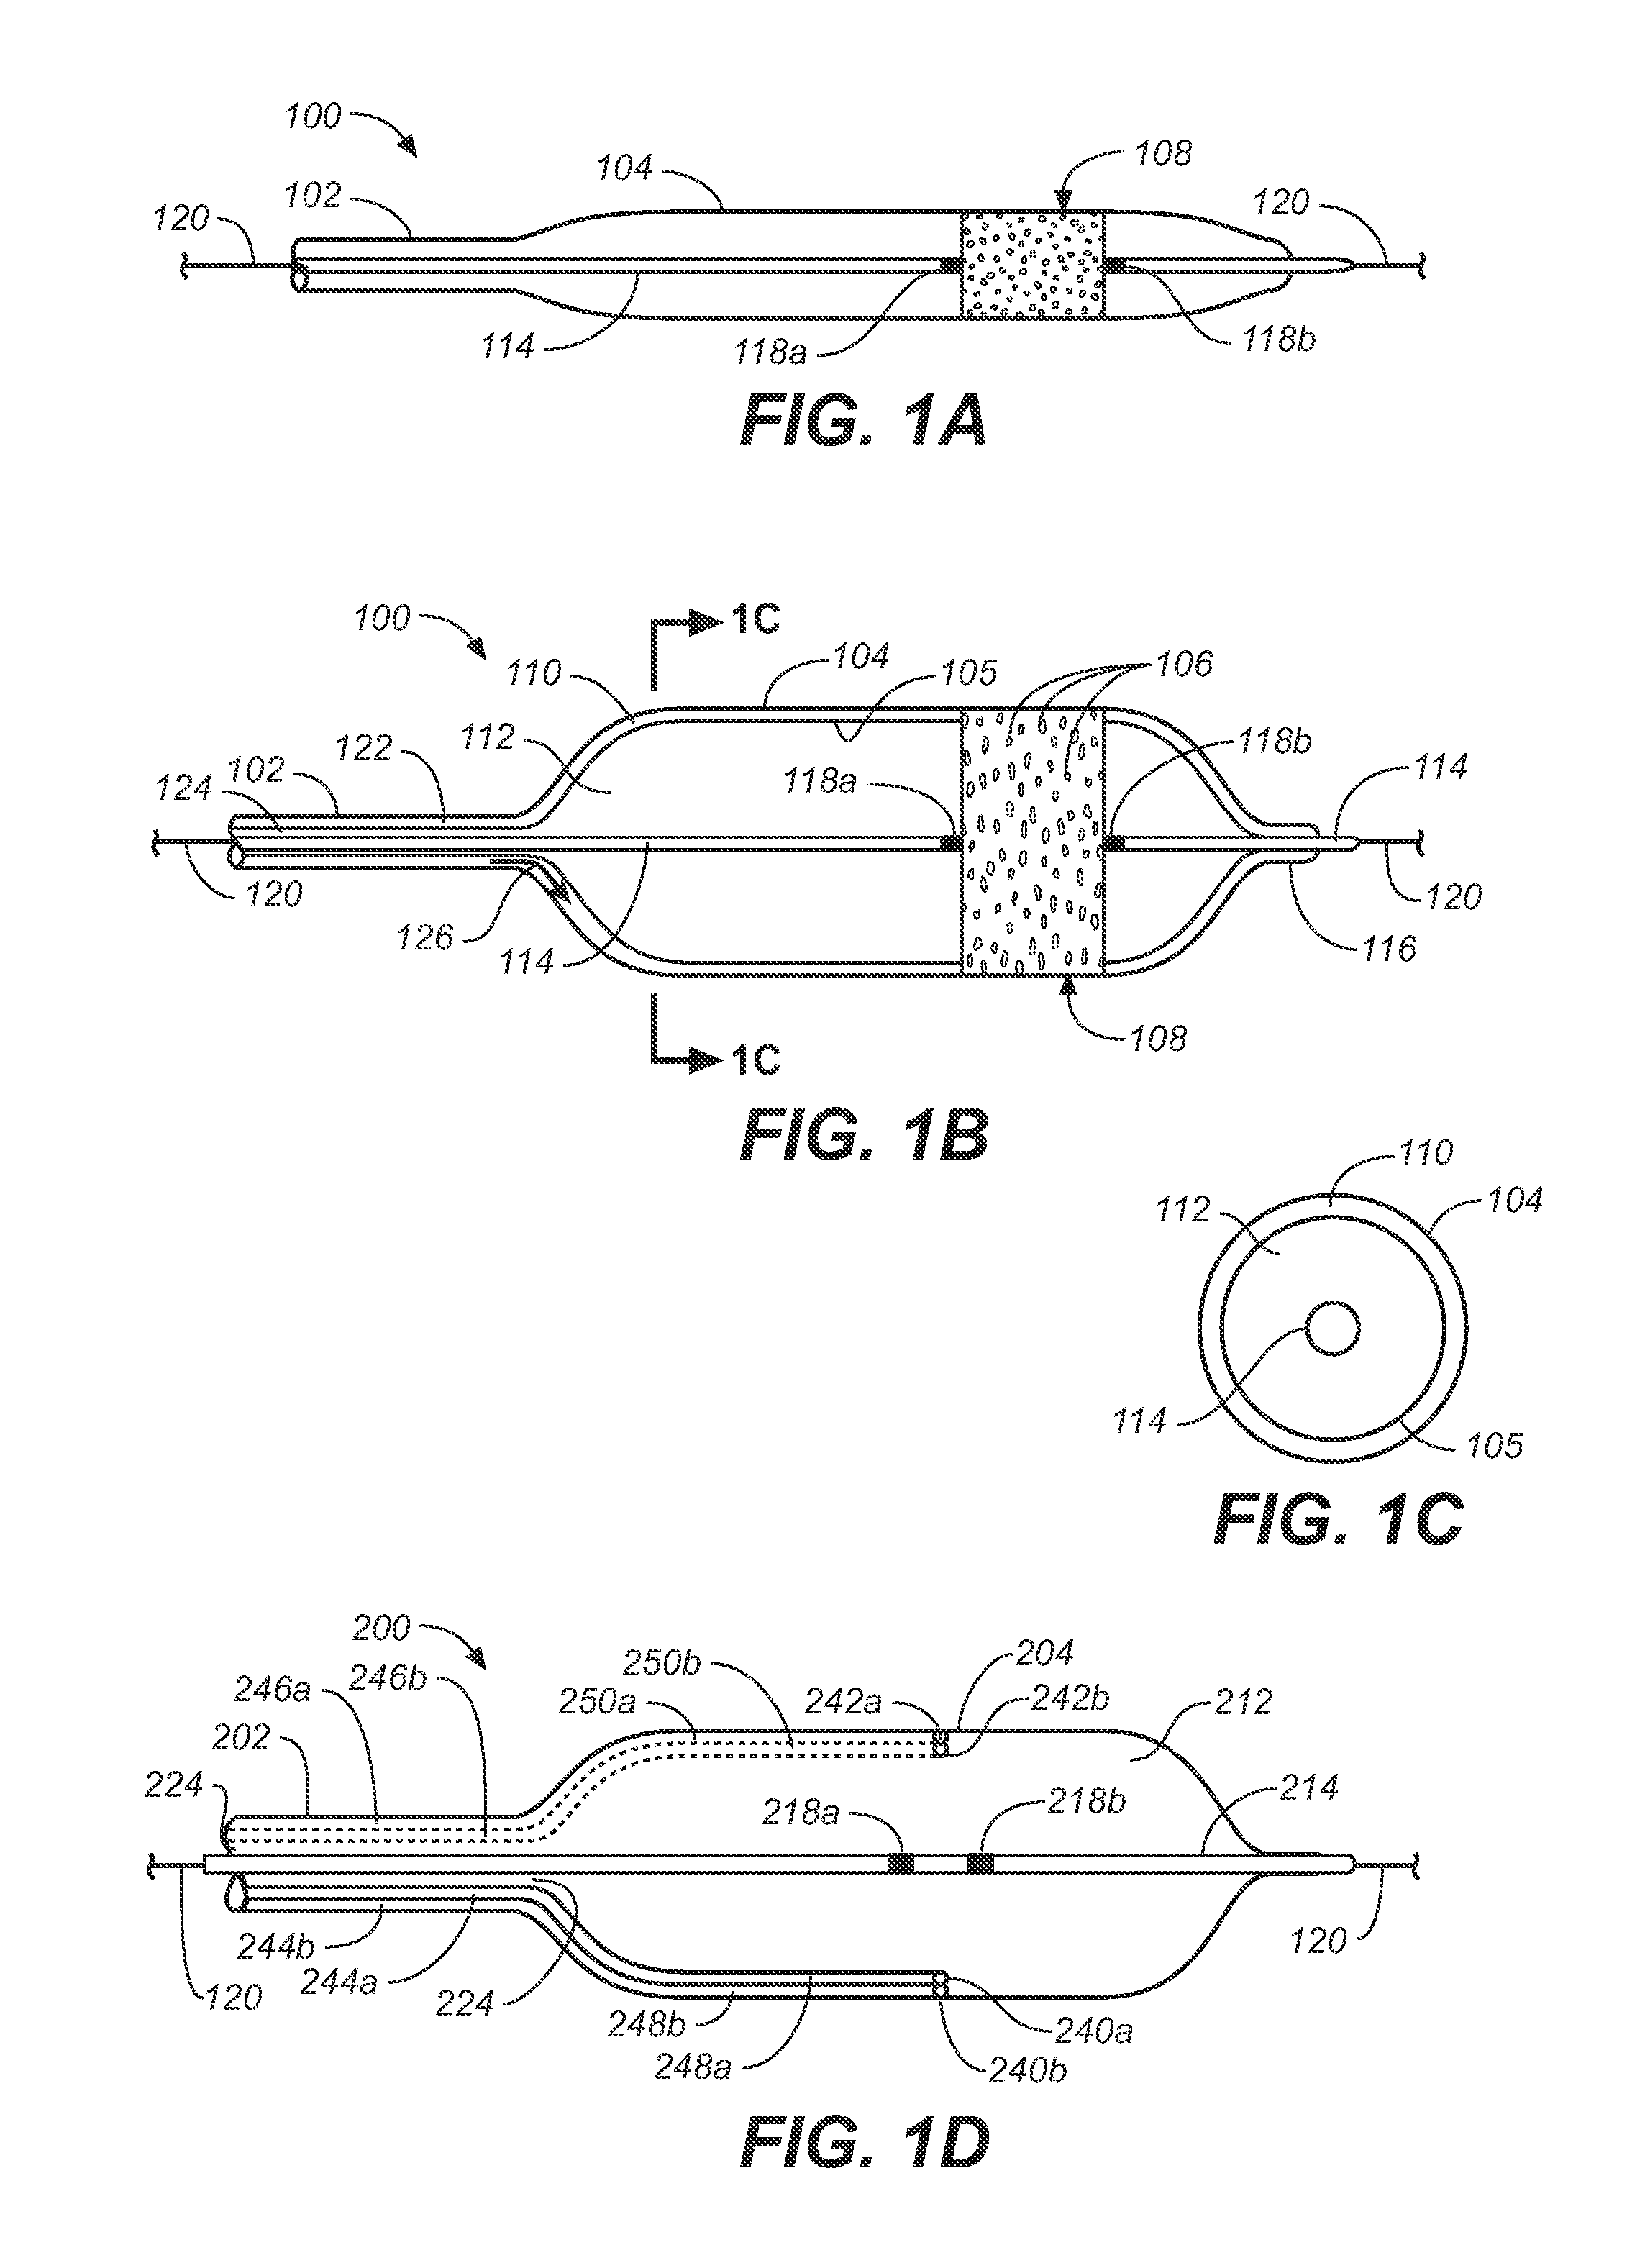 Endolumenal Sealant Delivery Apparatus and Methods